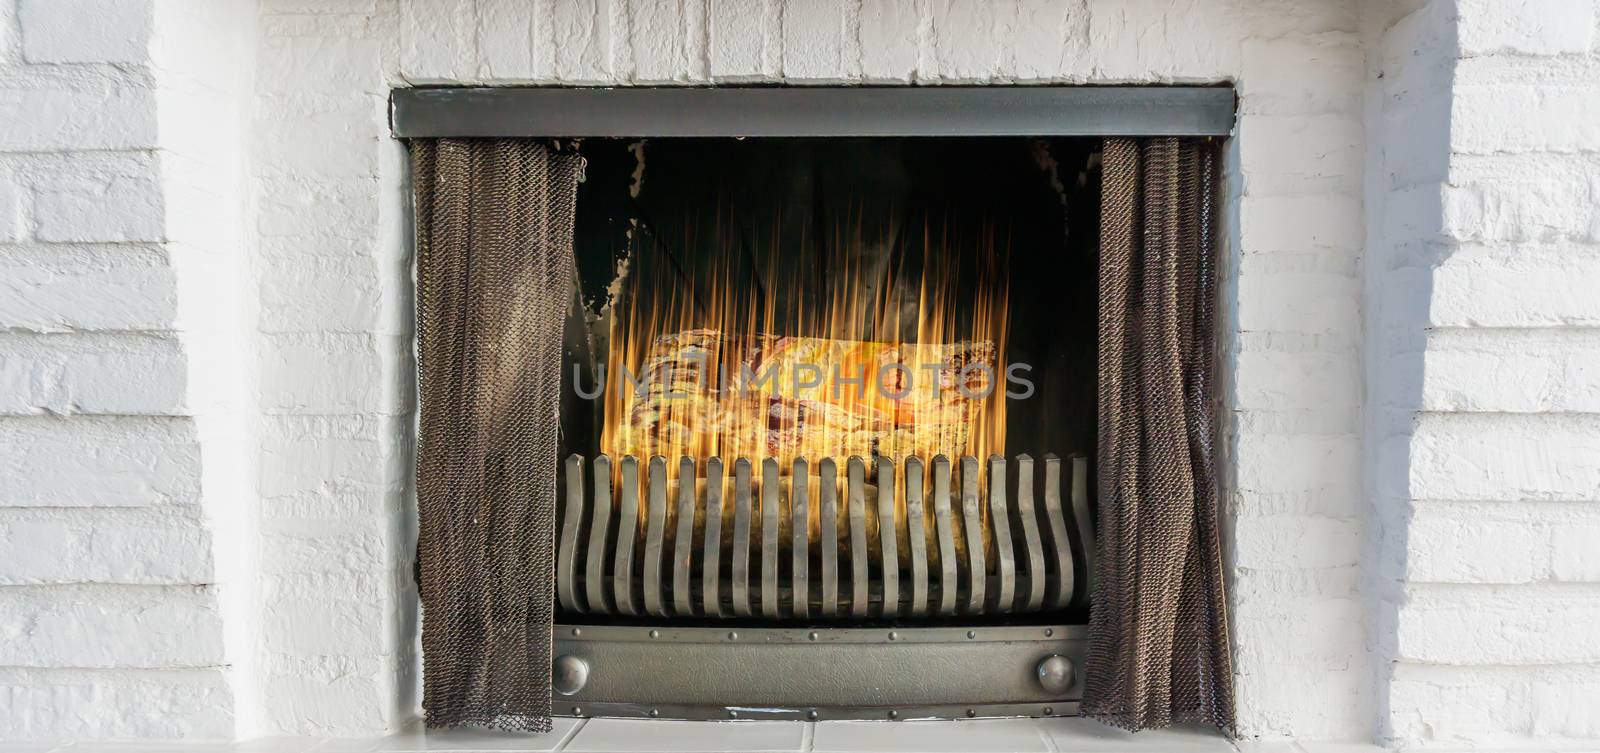 Burning fireplace with iron curtains in closeup winter background